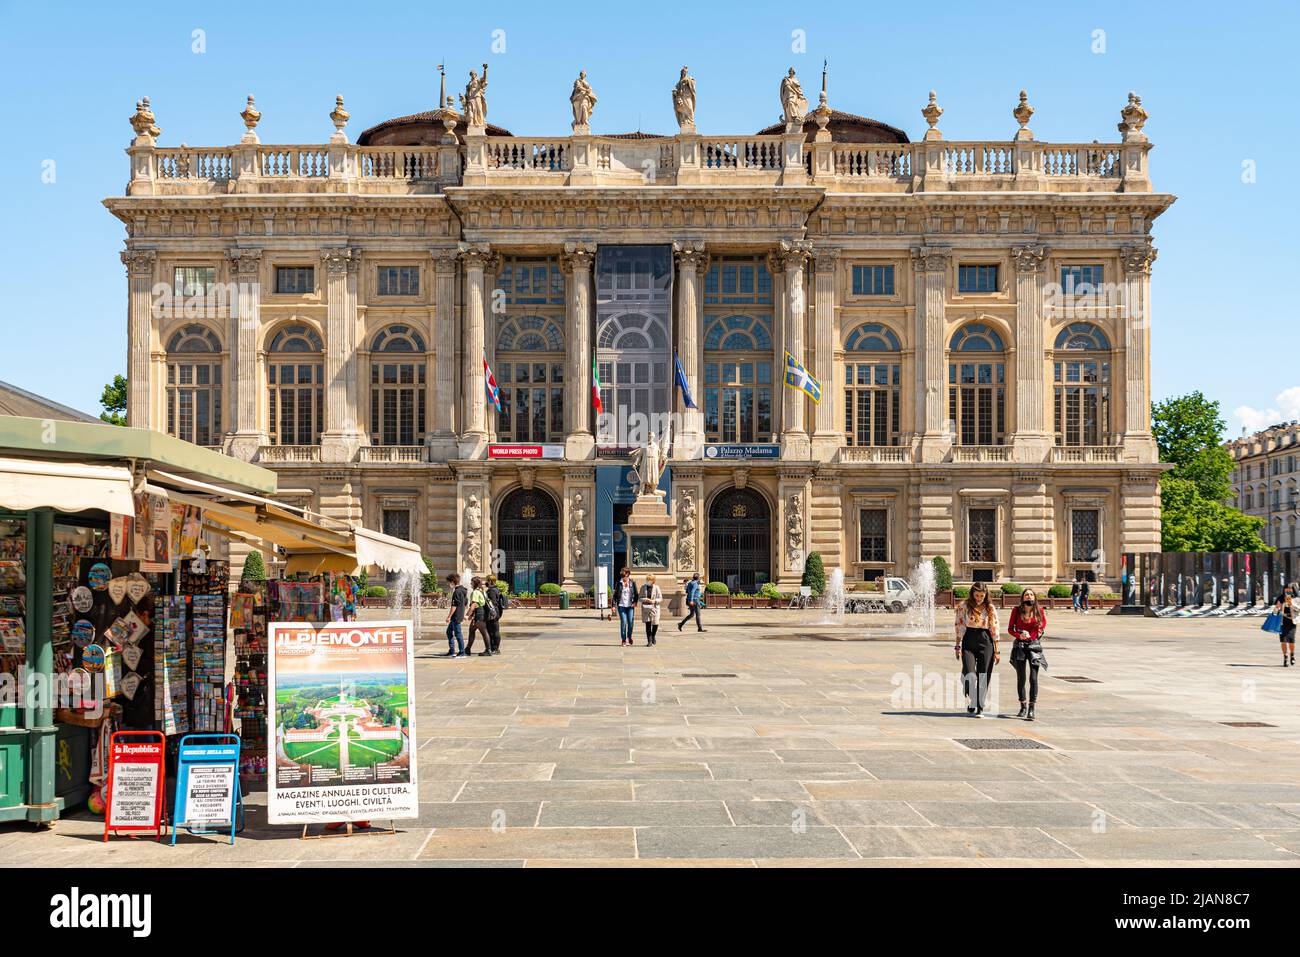 Turin, Italy. View of Piazza Castello and Palazzo Madama in the historic center of the city with some people walking around. May 12th, 2021. Stock Photo